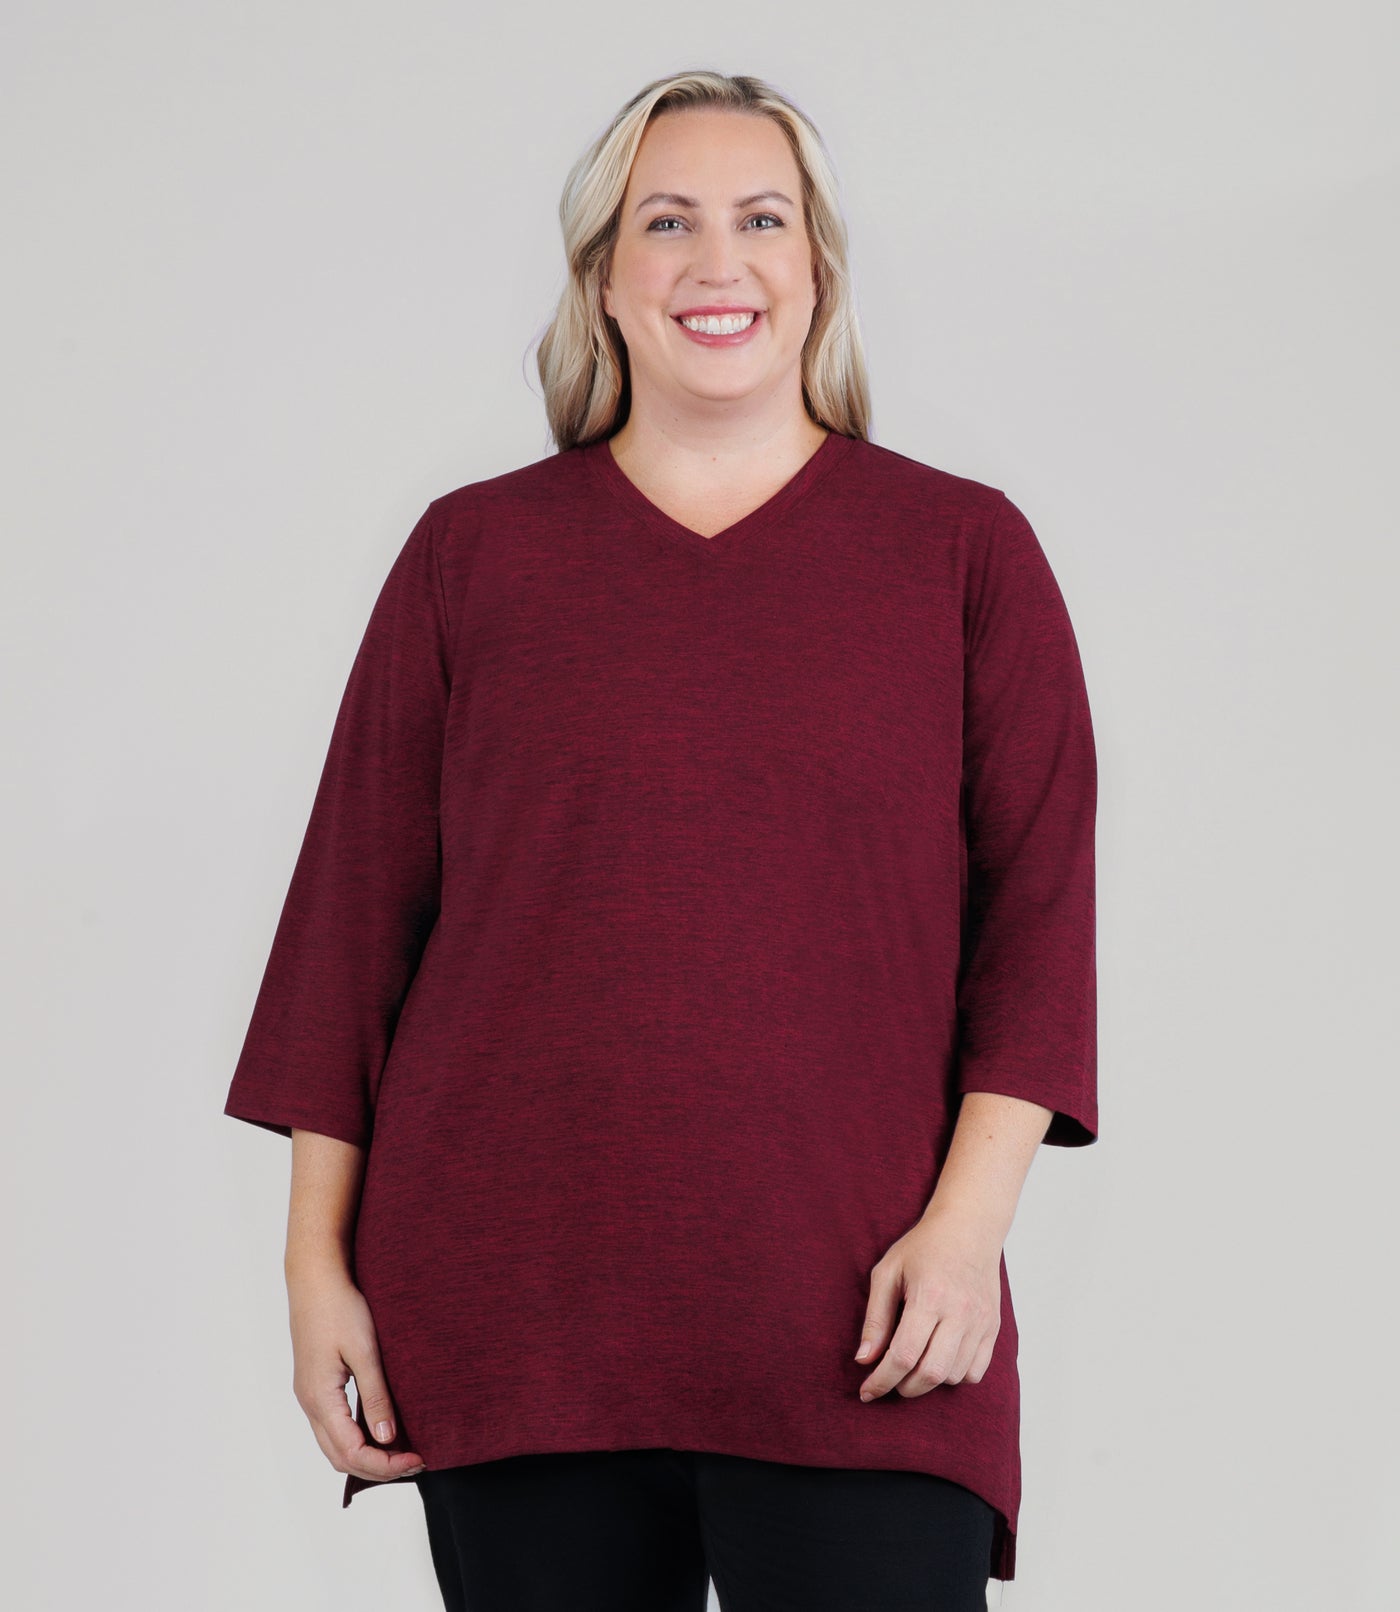 JunoActive model facing front, wearing SoftSupreme V Neck 3-4 sleeve tunic in color heather cranberry. Both of models arms and hands resting by her side. Tunic is longer in back with a side slit.